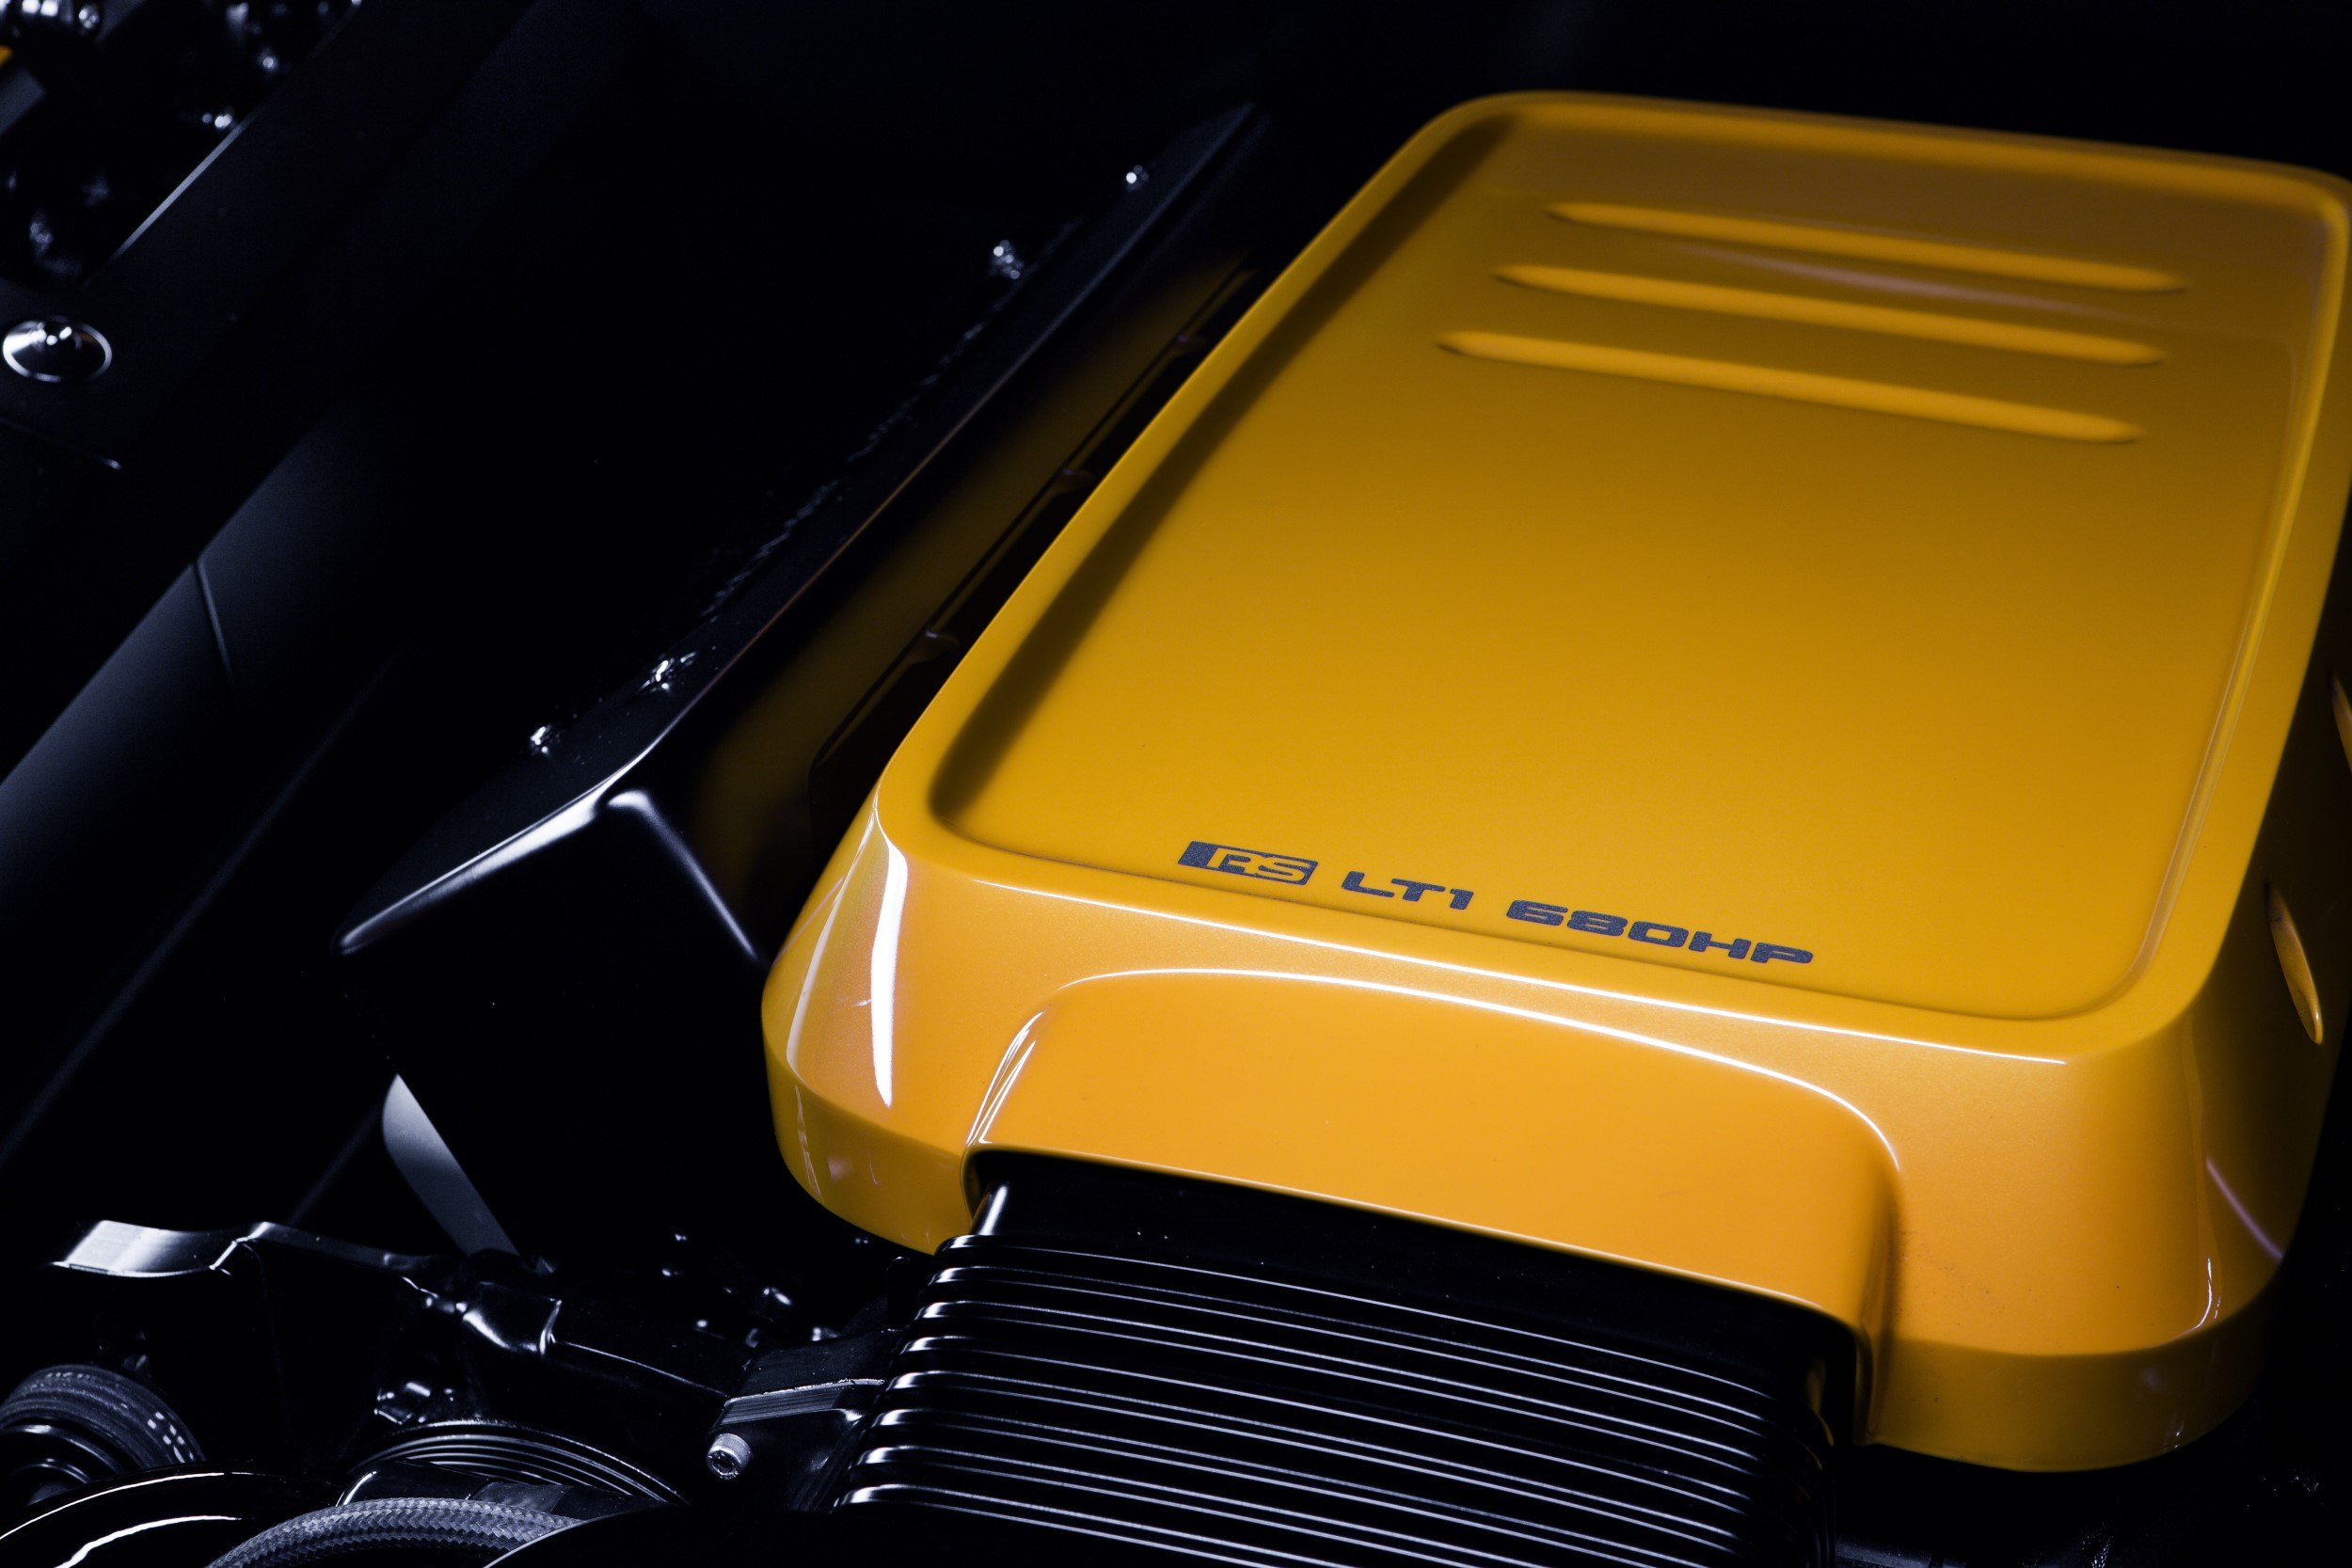 Roadster Shop LT1 Engine in Yellow Chevy Camaro - Photo by Roadster Shop